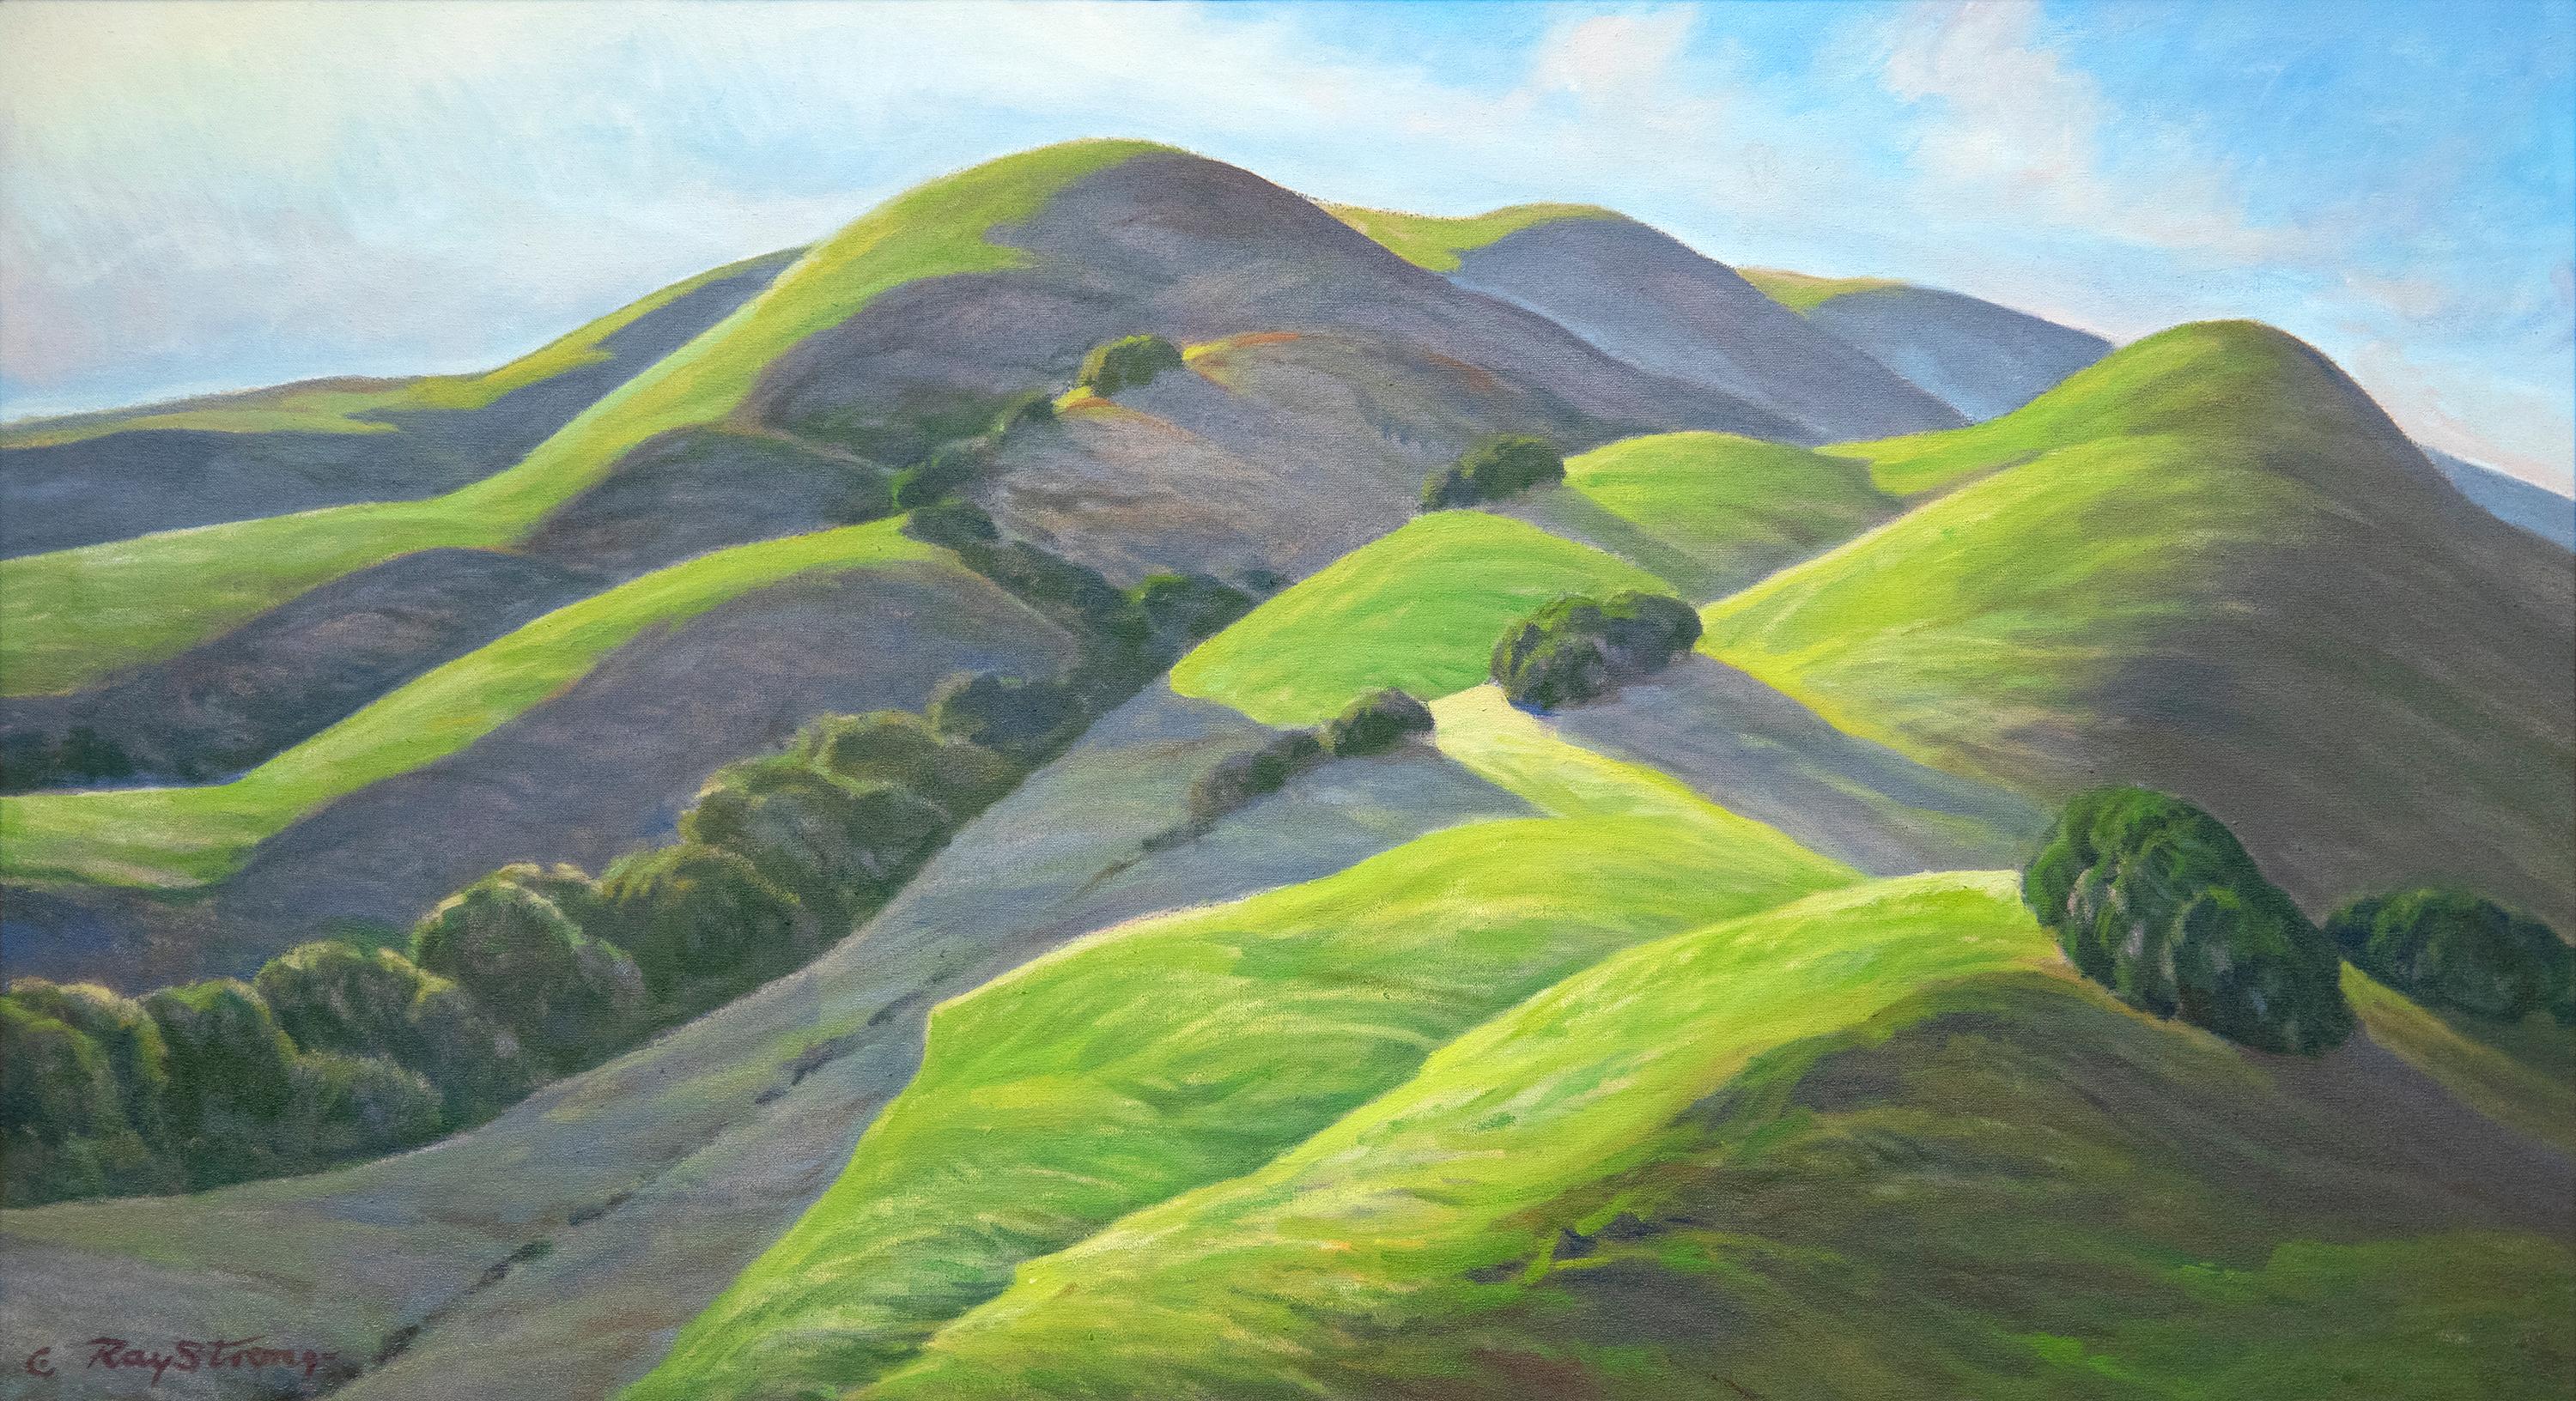 STRONG, RAY STANFORD Landscape Painting - Spring, Black Mountain, Marin County